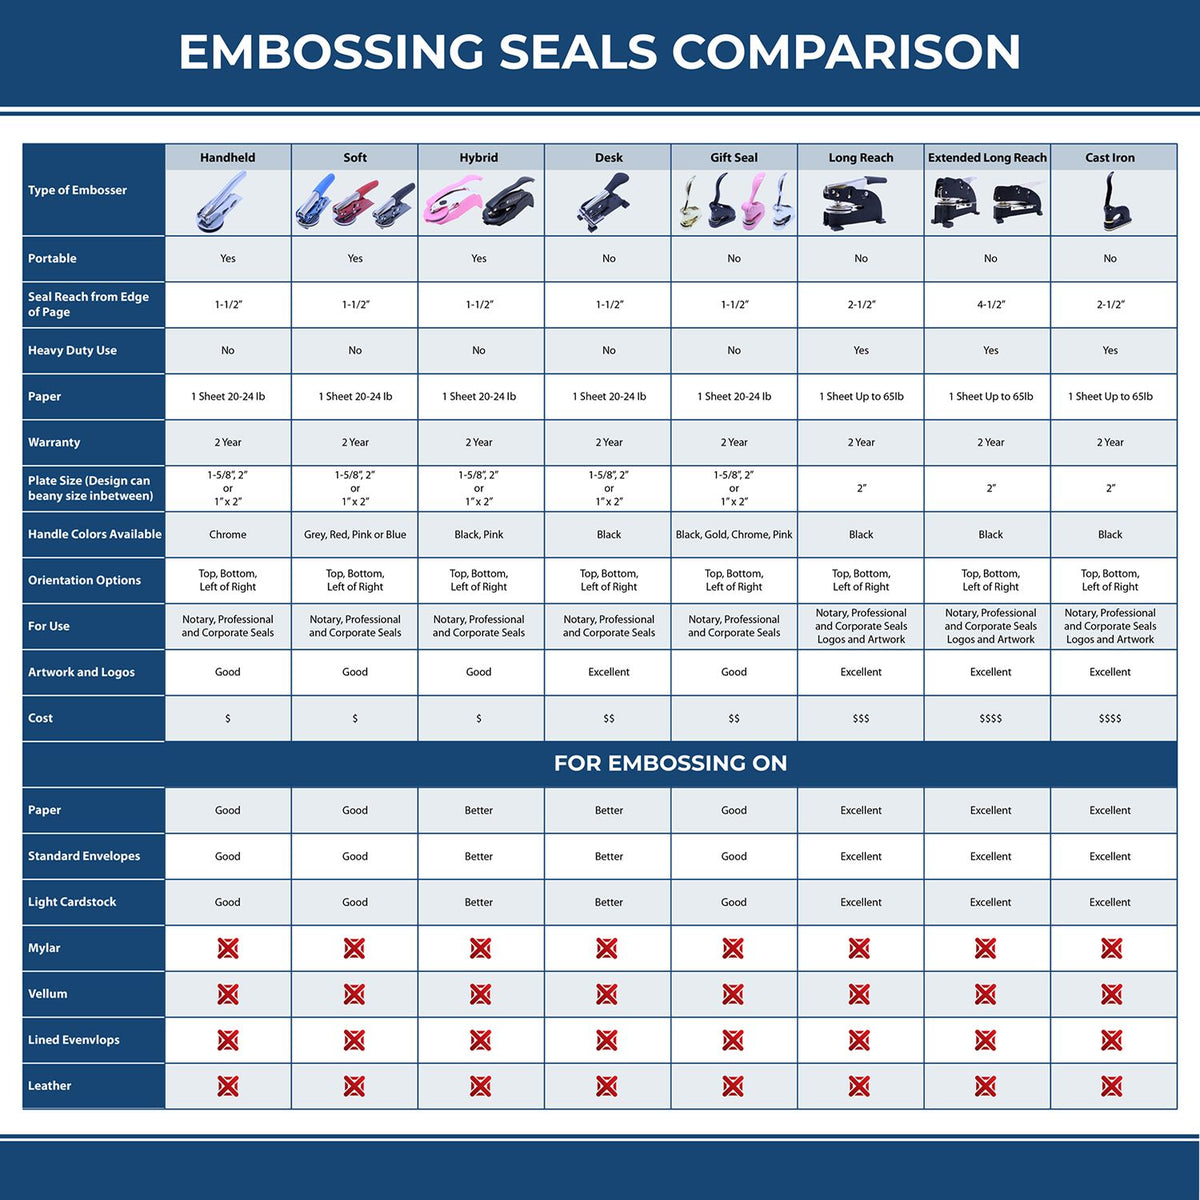 A comparison chart for the different types of mount models available for the Heavy Duty Cast Iron Arizona Architect Embosser.